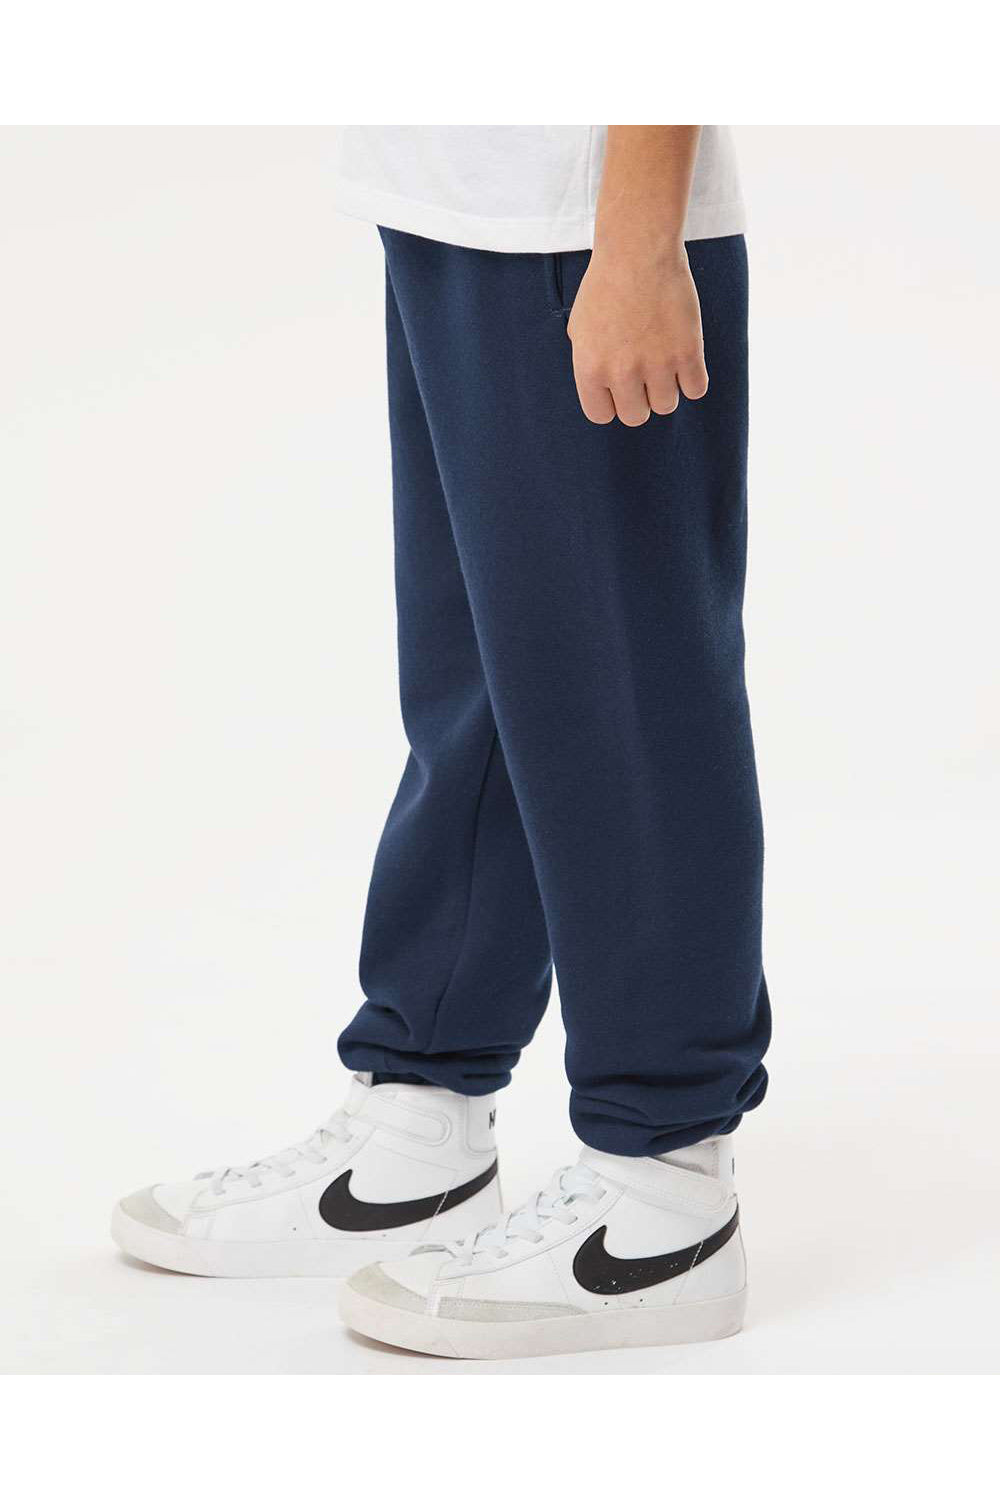 Russell Athletic 20JHBB Youth Dri Power Jogger Sweatpants w/ Pockets Navy Blue Model Side